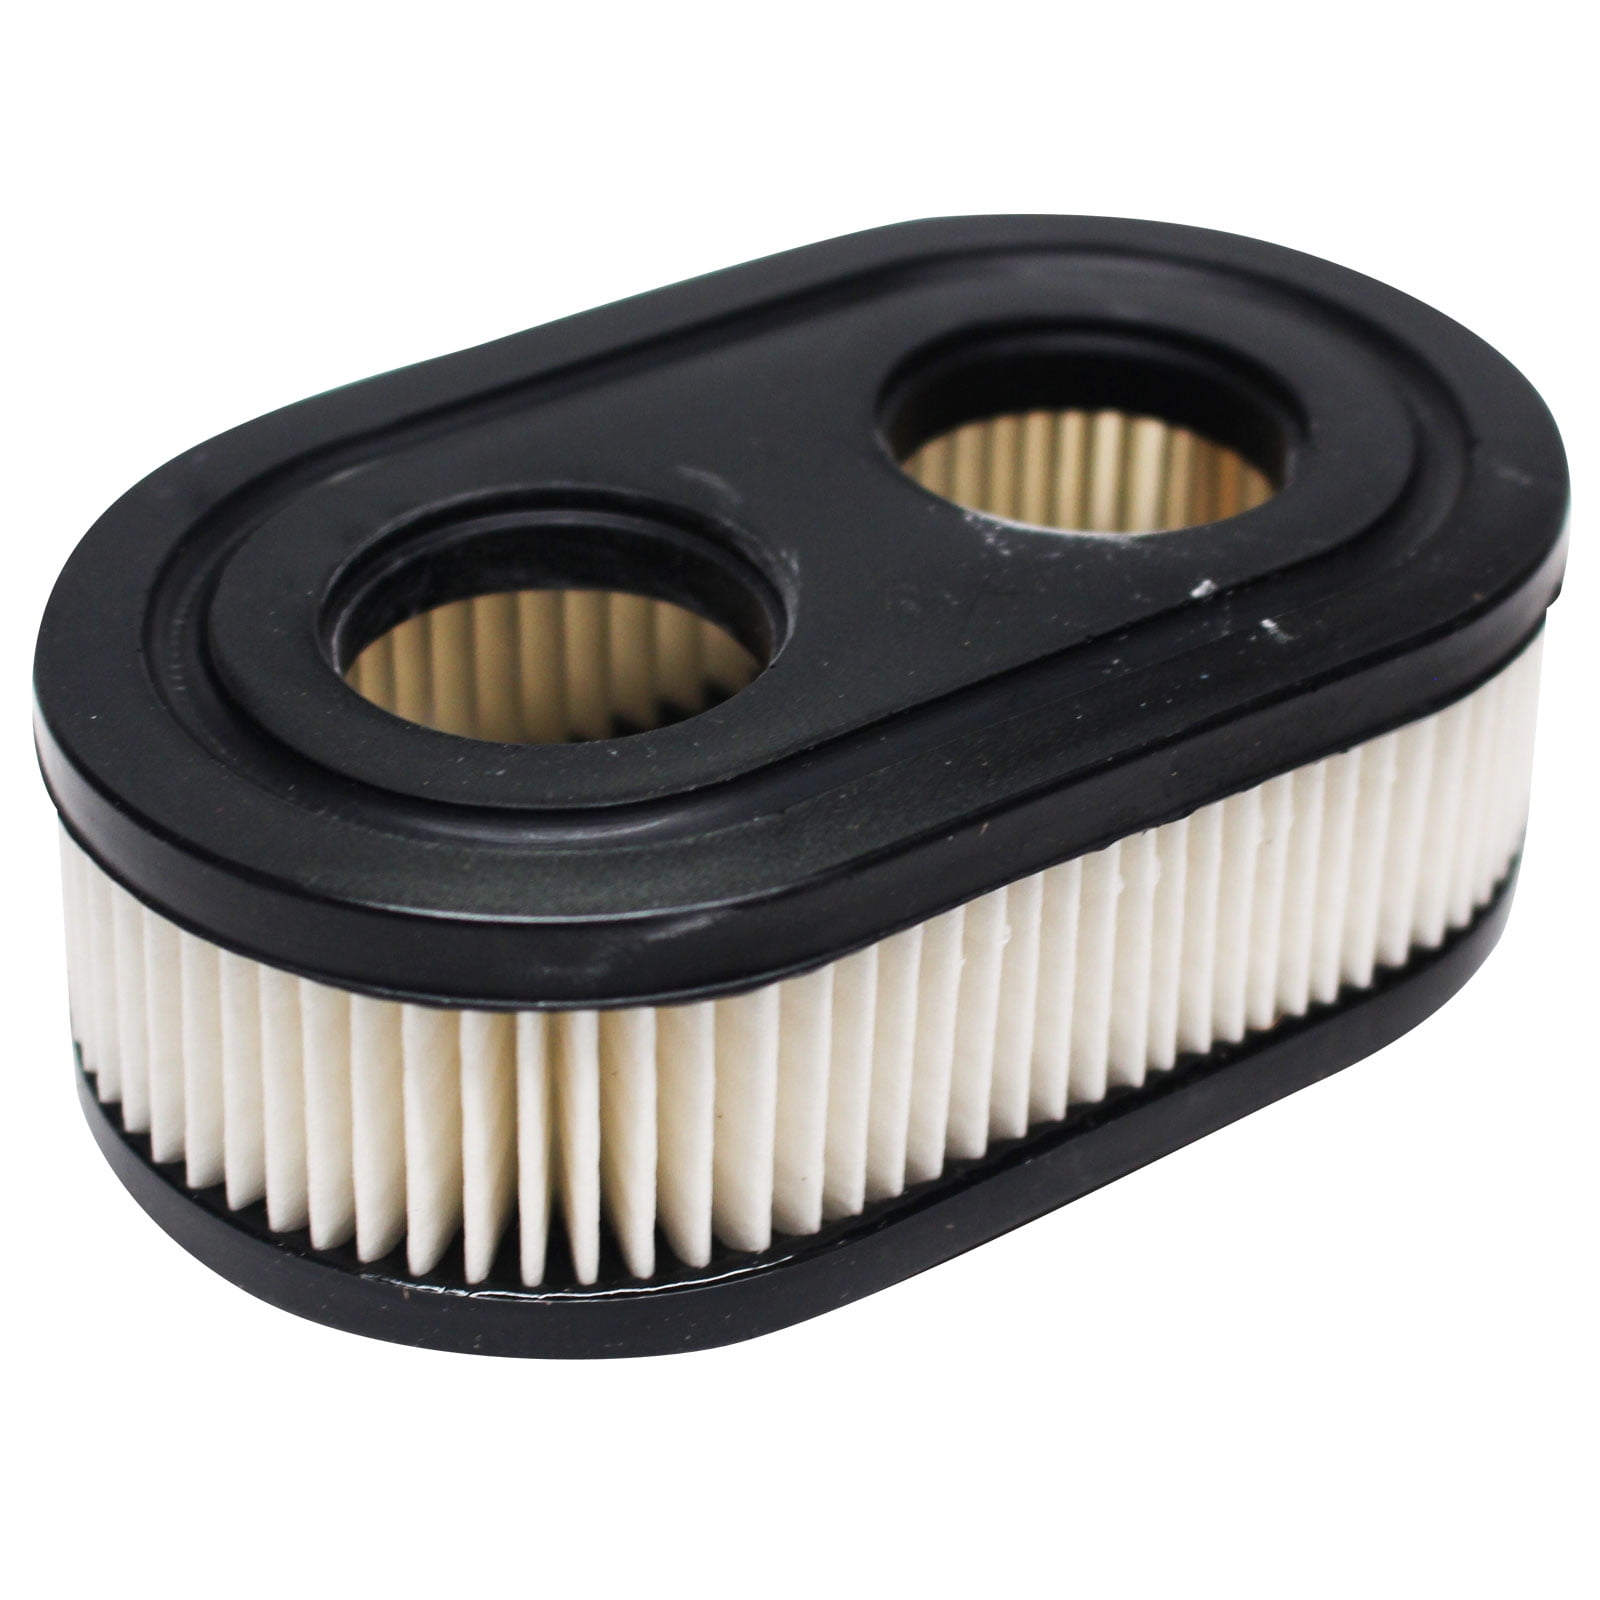 Lawn Mower Air Filter For briggs stratton 798452 5432 5432K 593260 ReplaC*hu